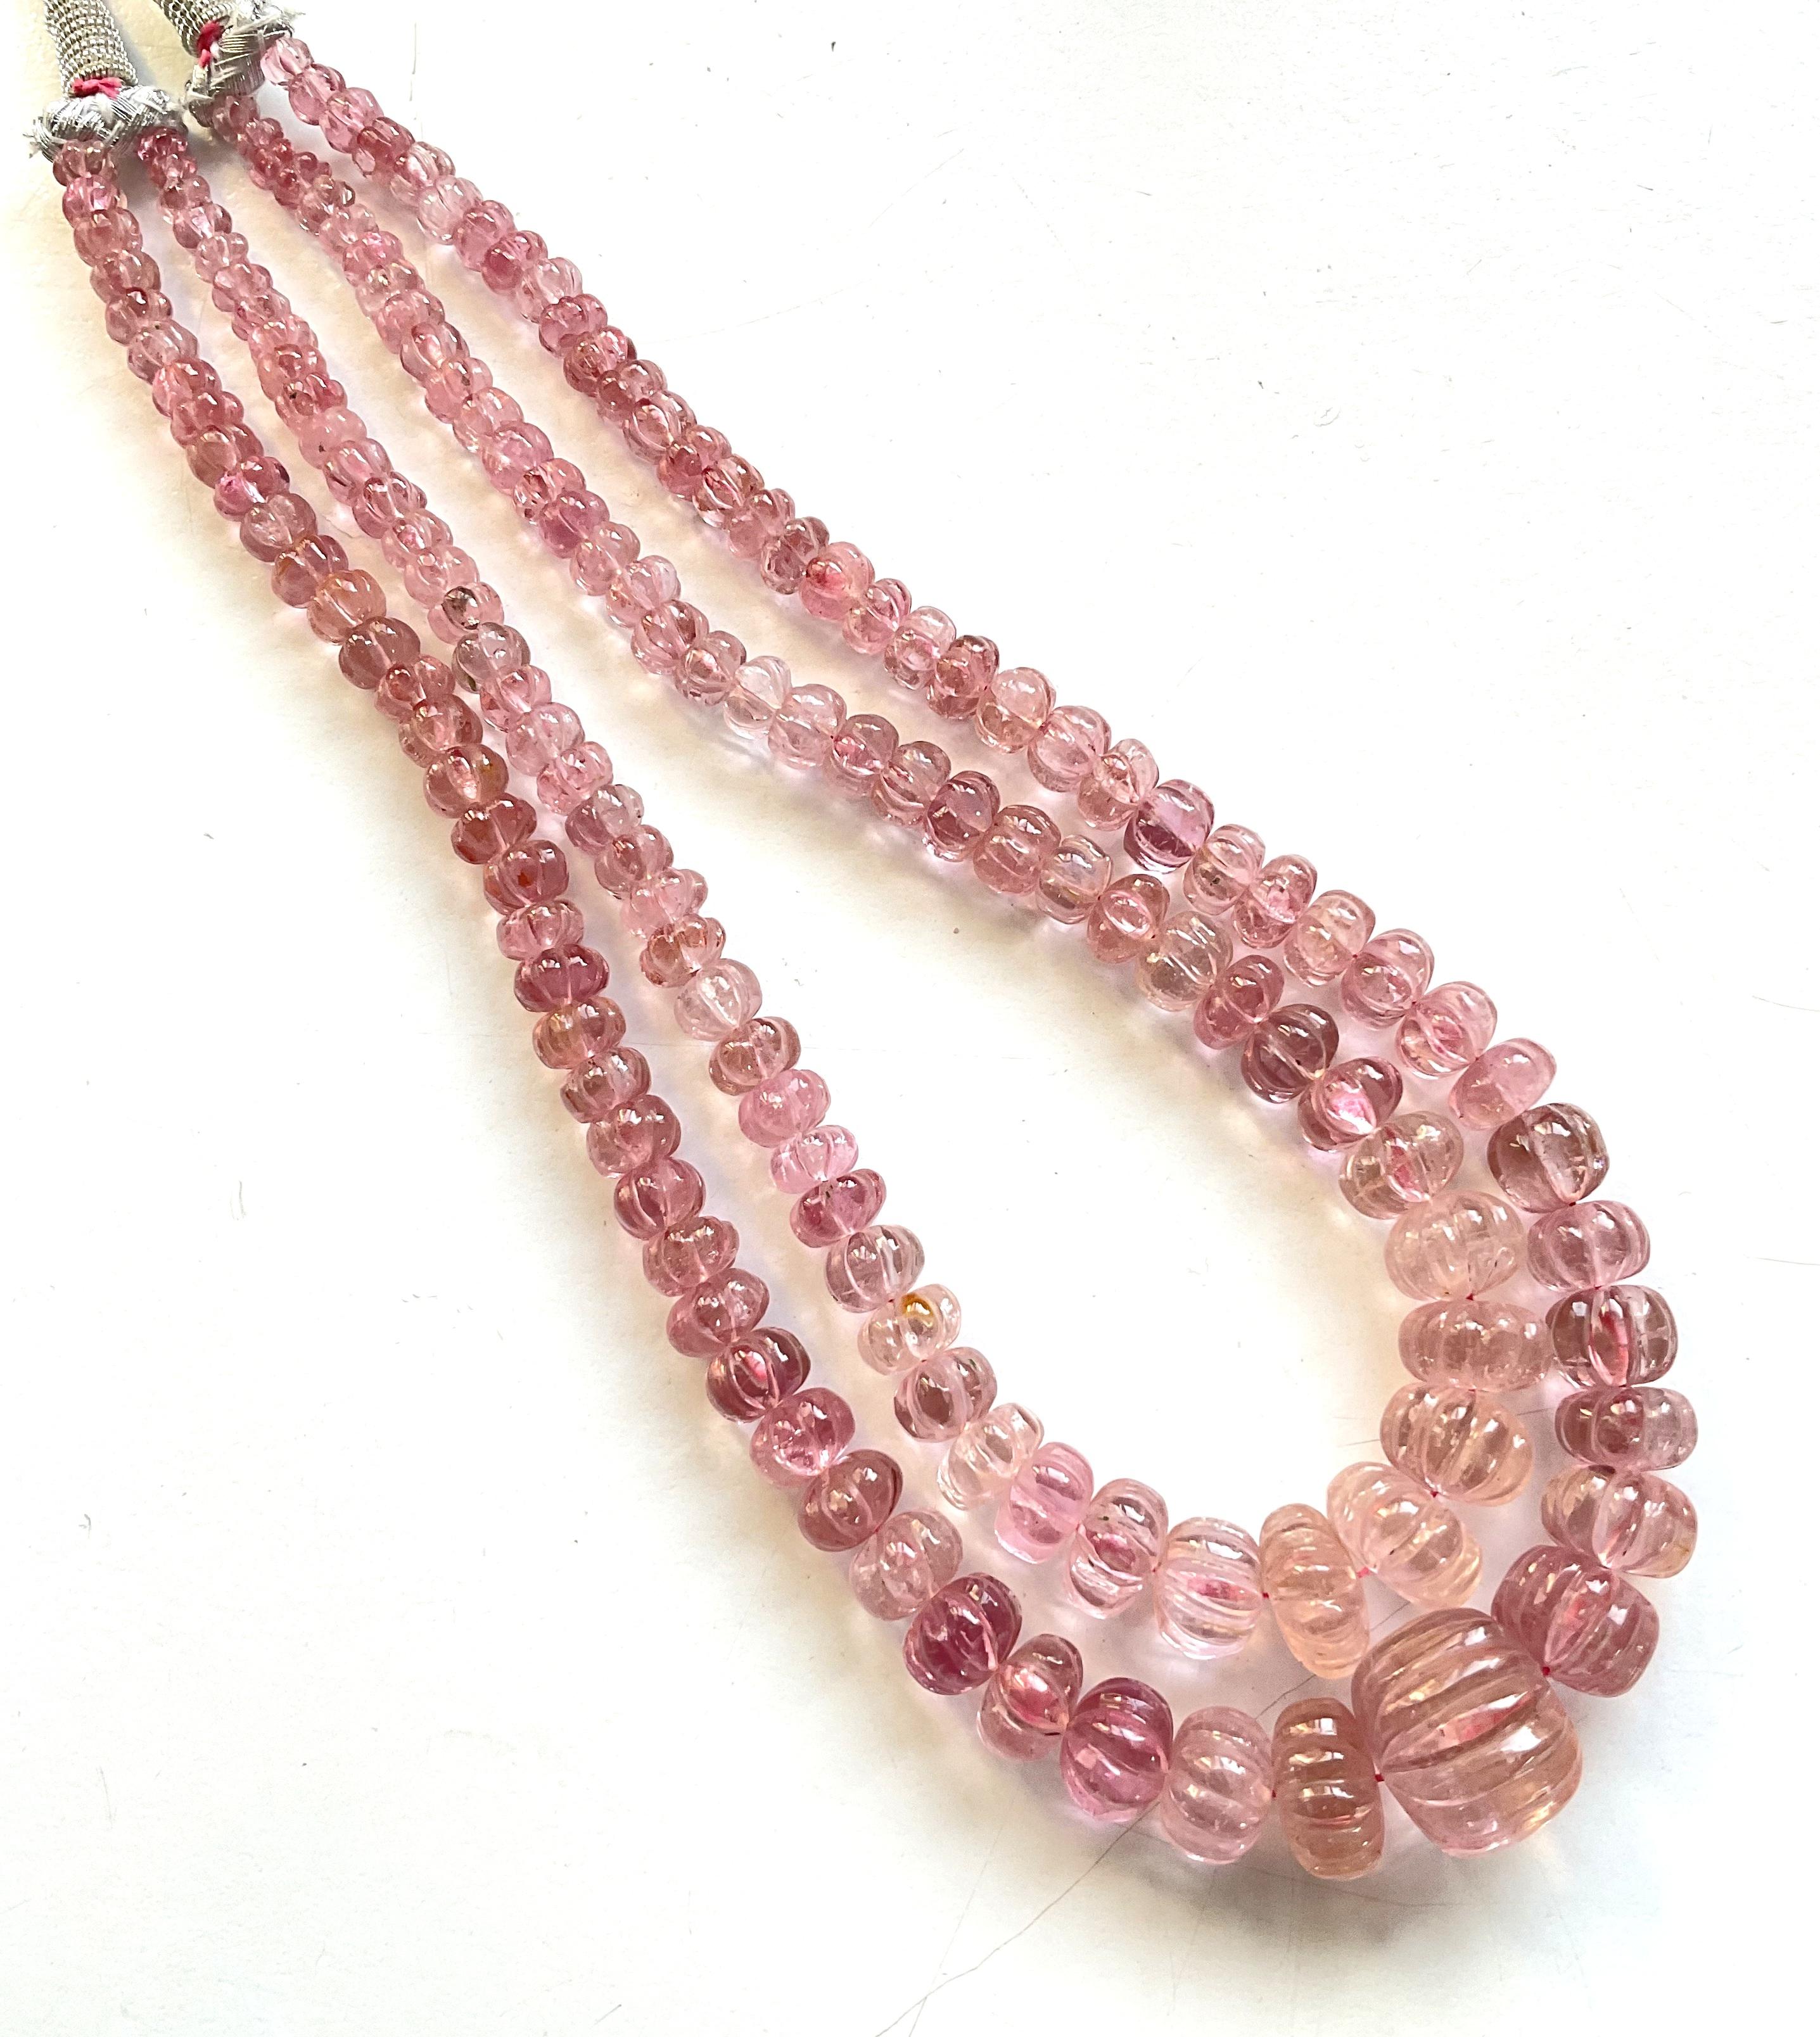 396.95 Carats pink Tourmaline carved melon beads necklace Jewelry Natural Gem For Sale 3